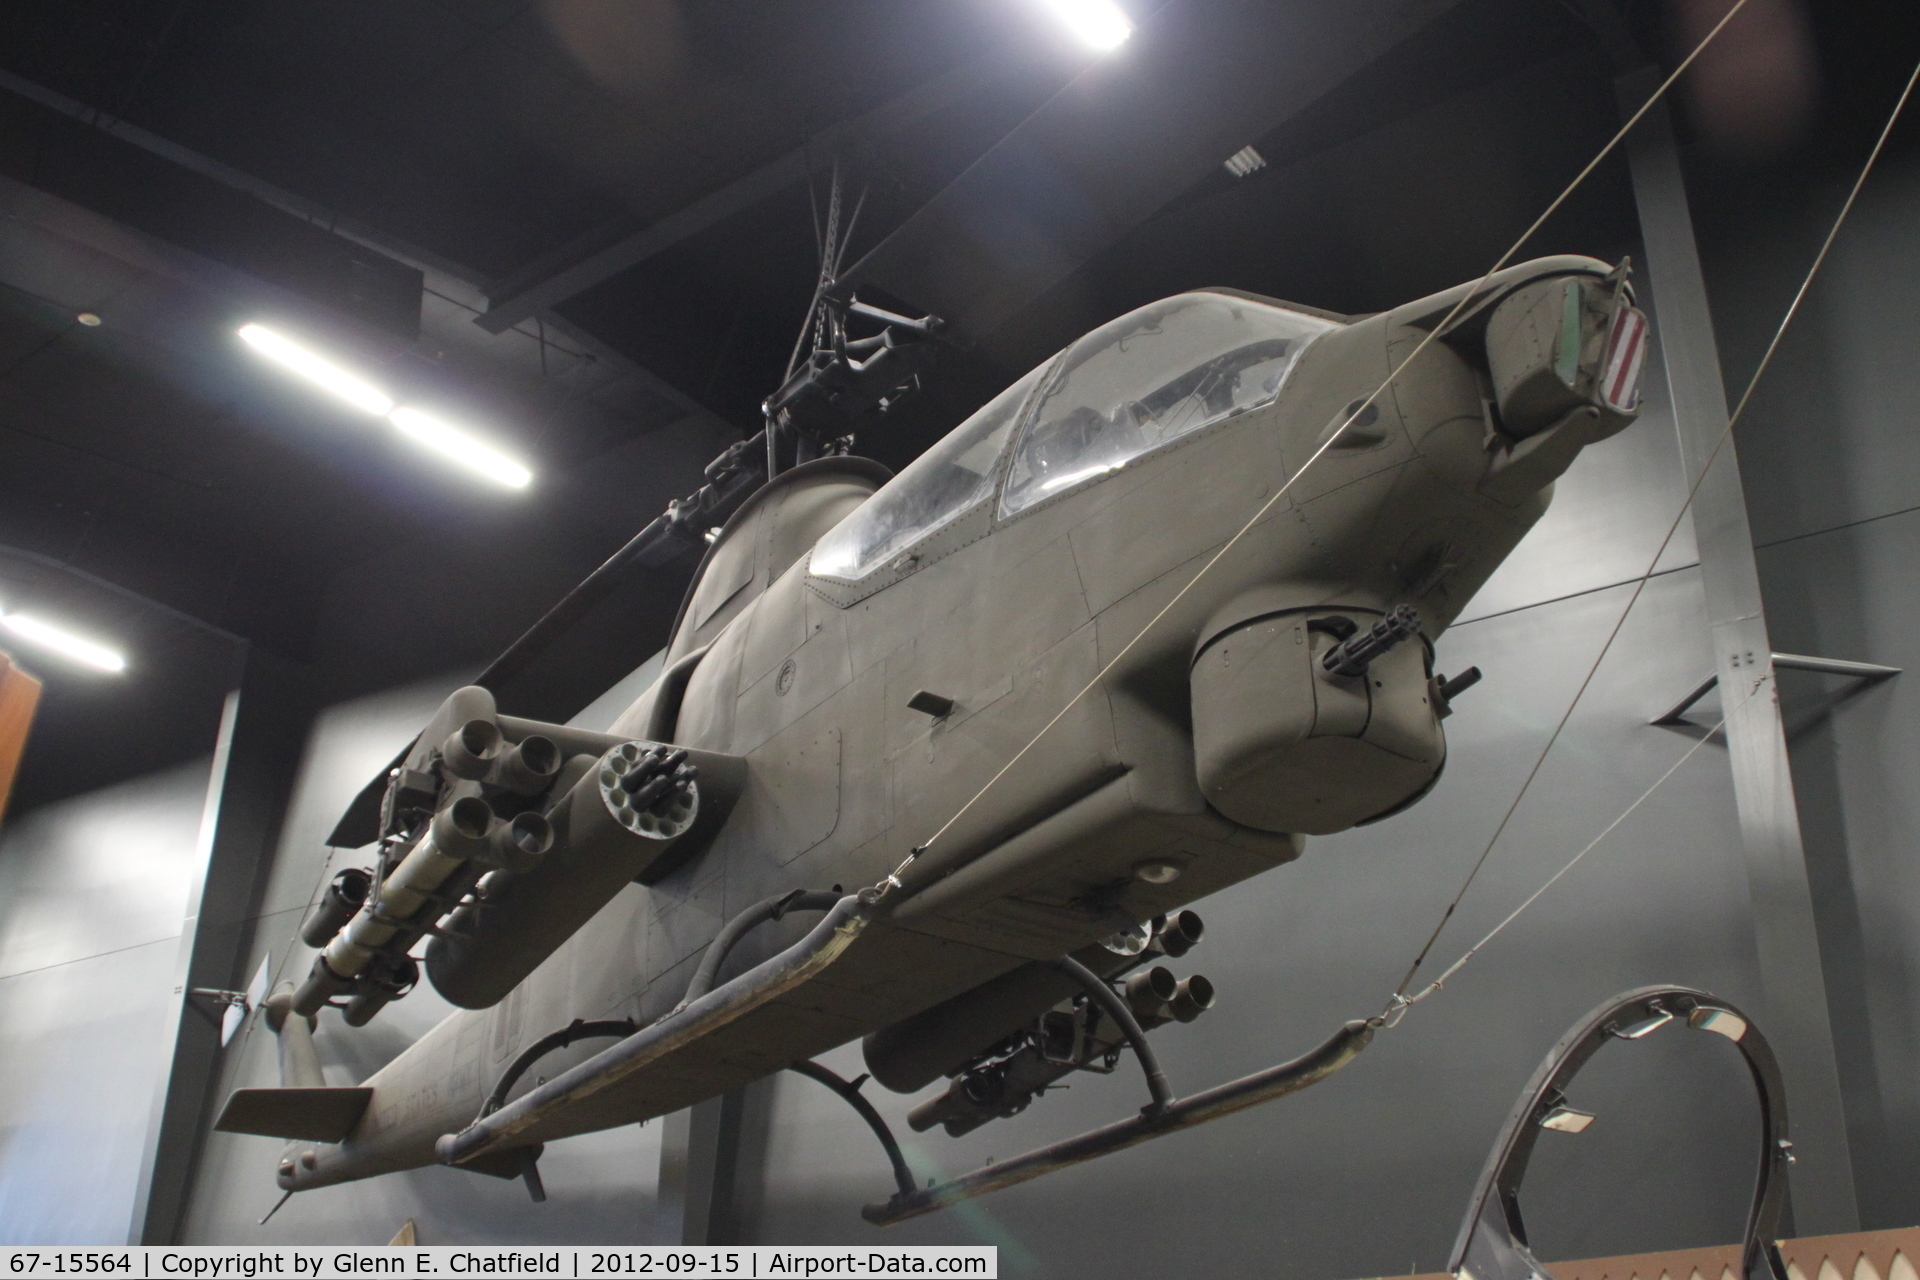 67-15564, 1967 Bell AH-1S Cobra C/N 20228, At the Iowa Gold Star Military Museum